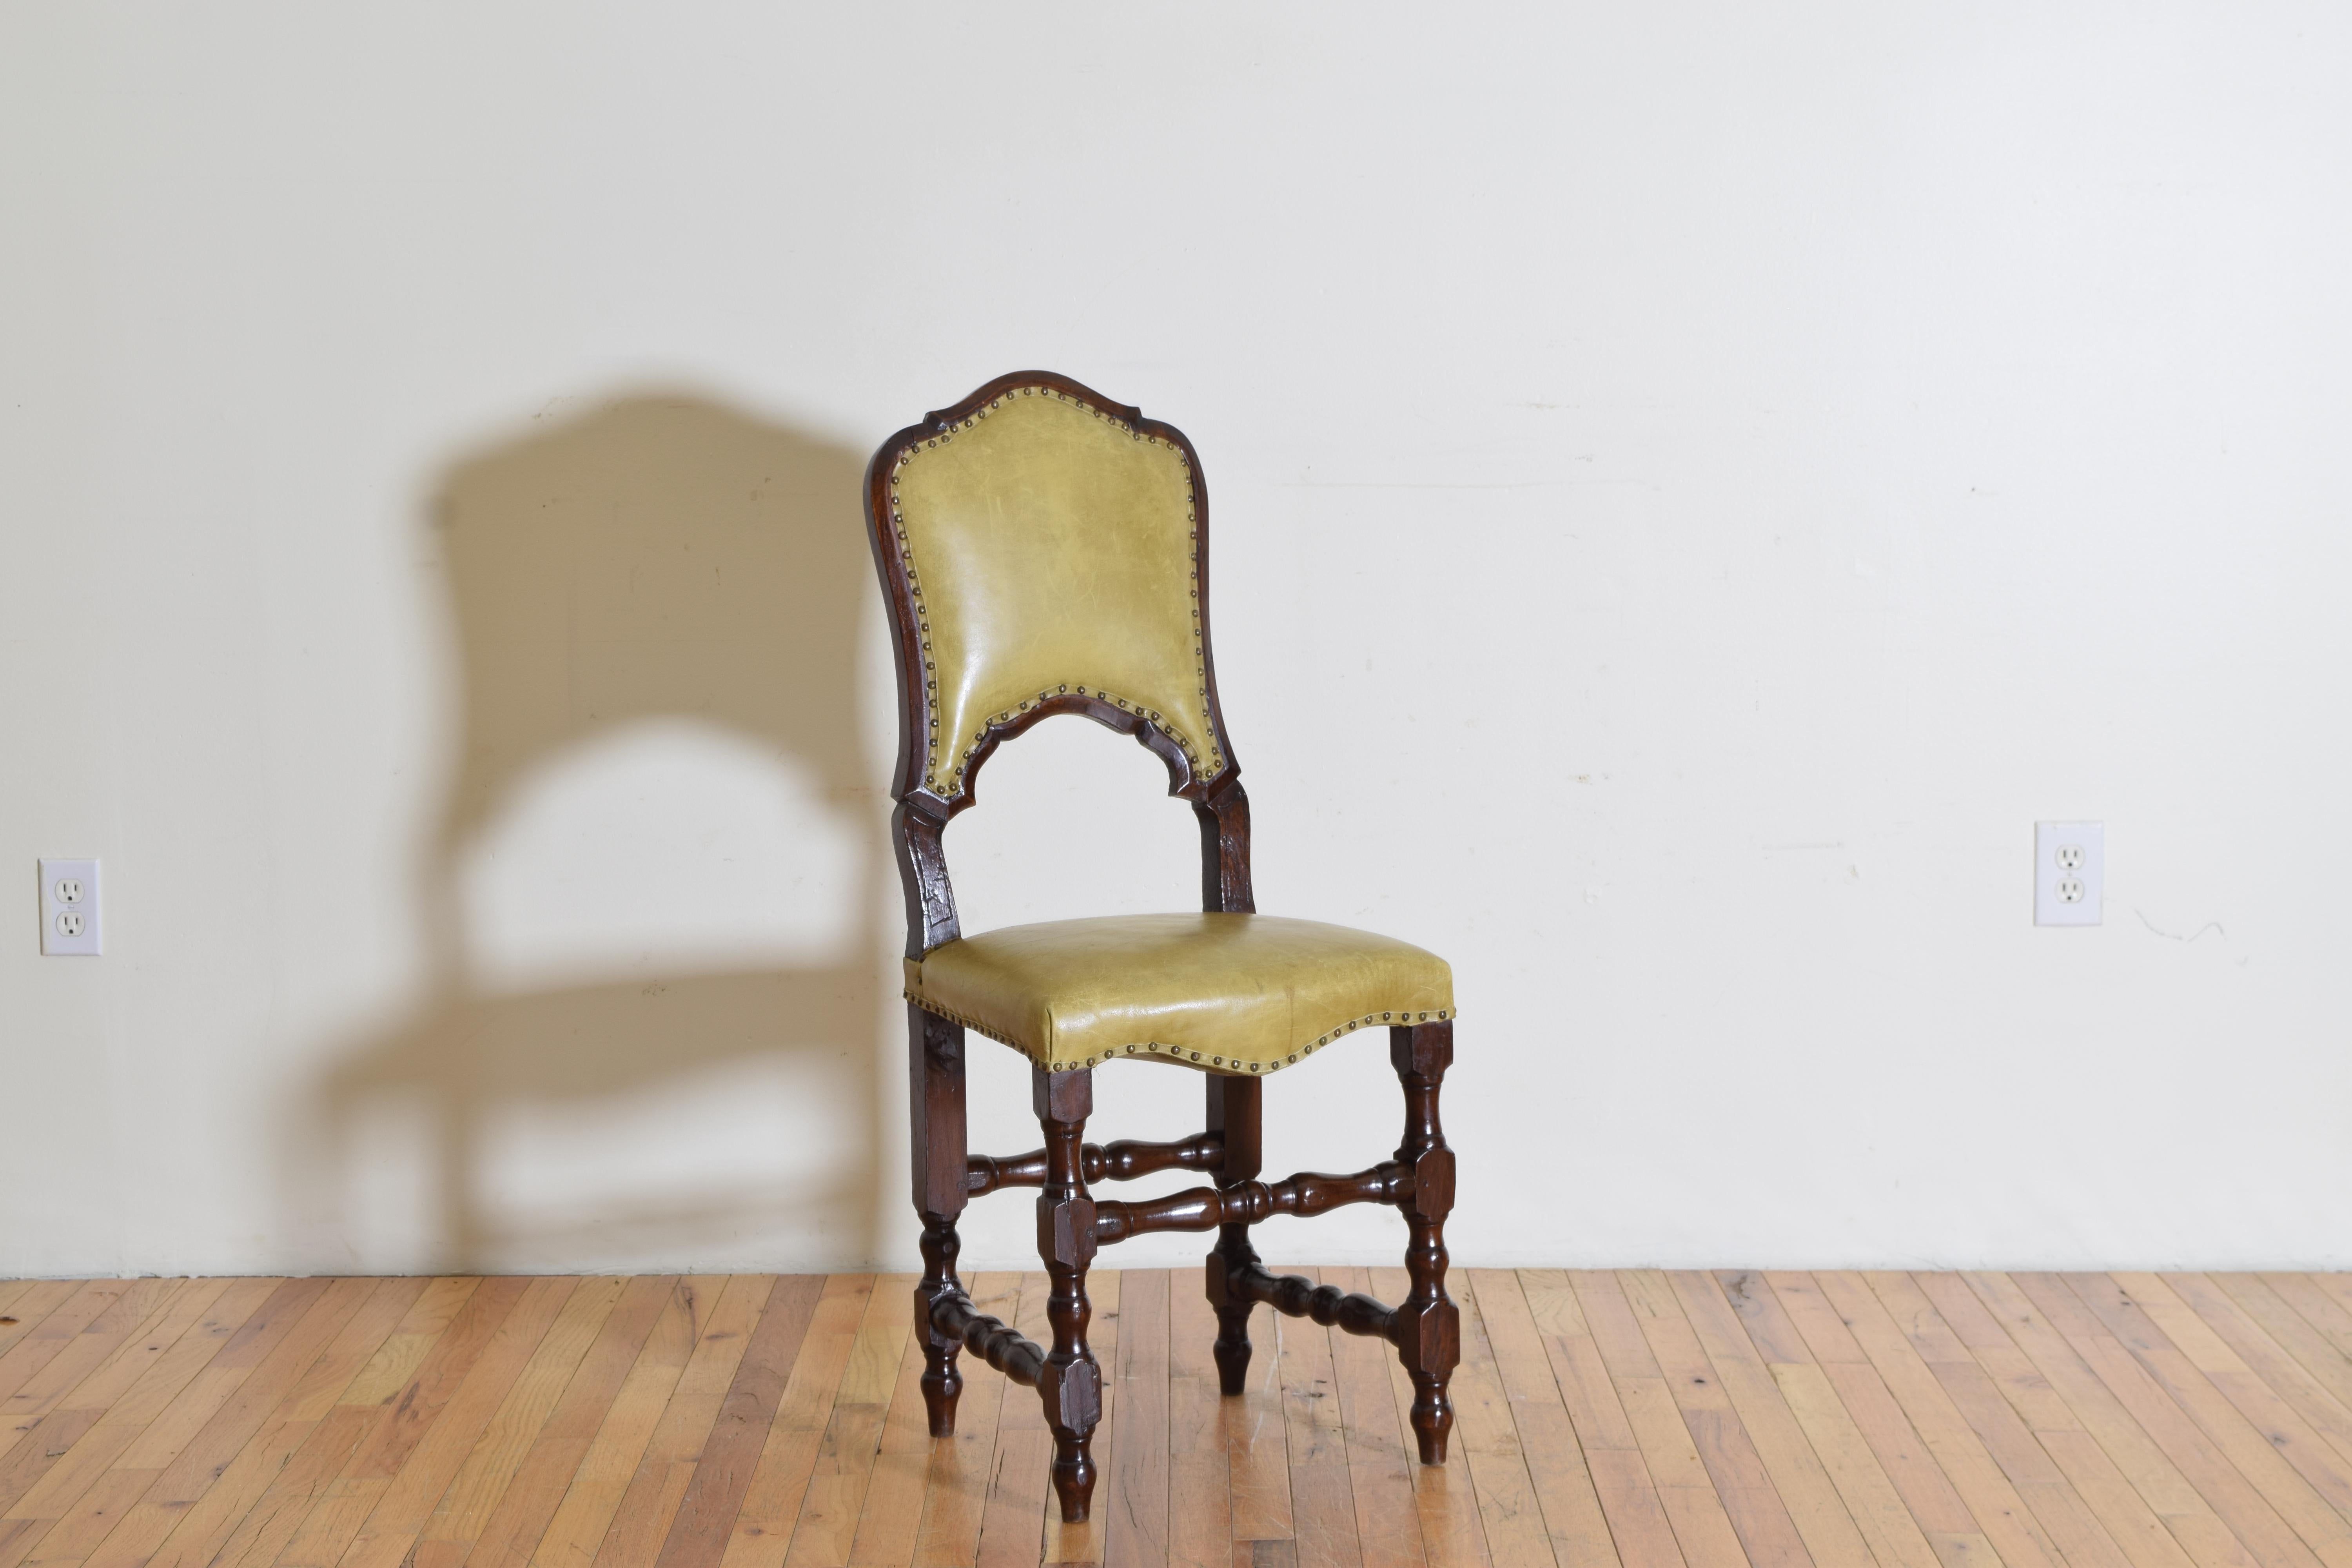 Hand-Carved Set of 8 Walnut and Leather Upholstered Dining Chairs, 19th Century